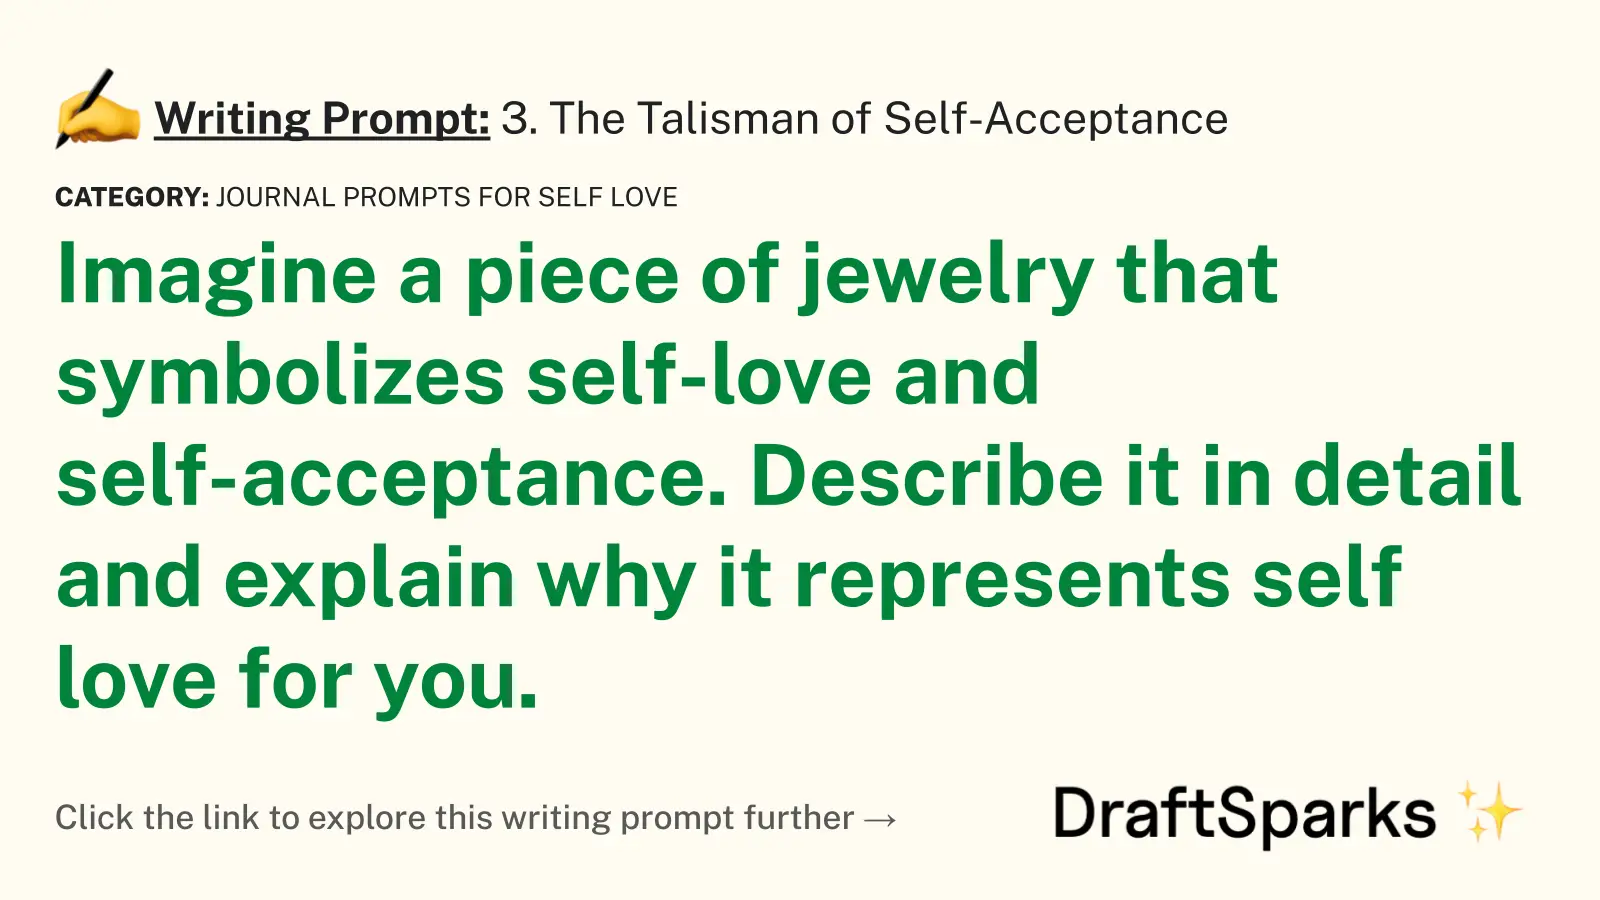 3. The Talisman of Self-Acceptance